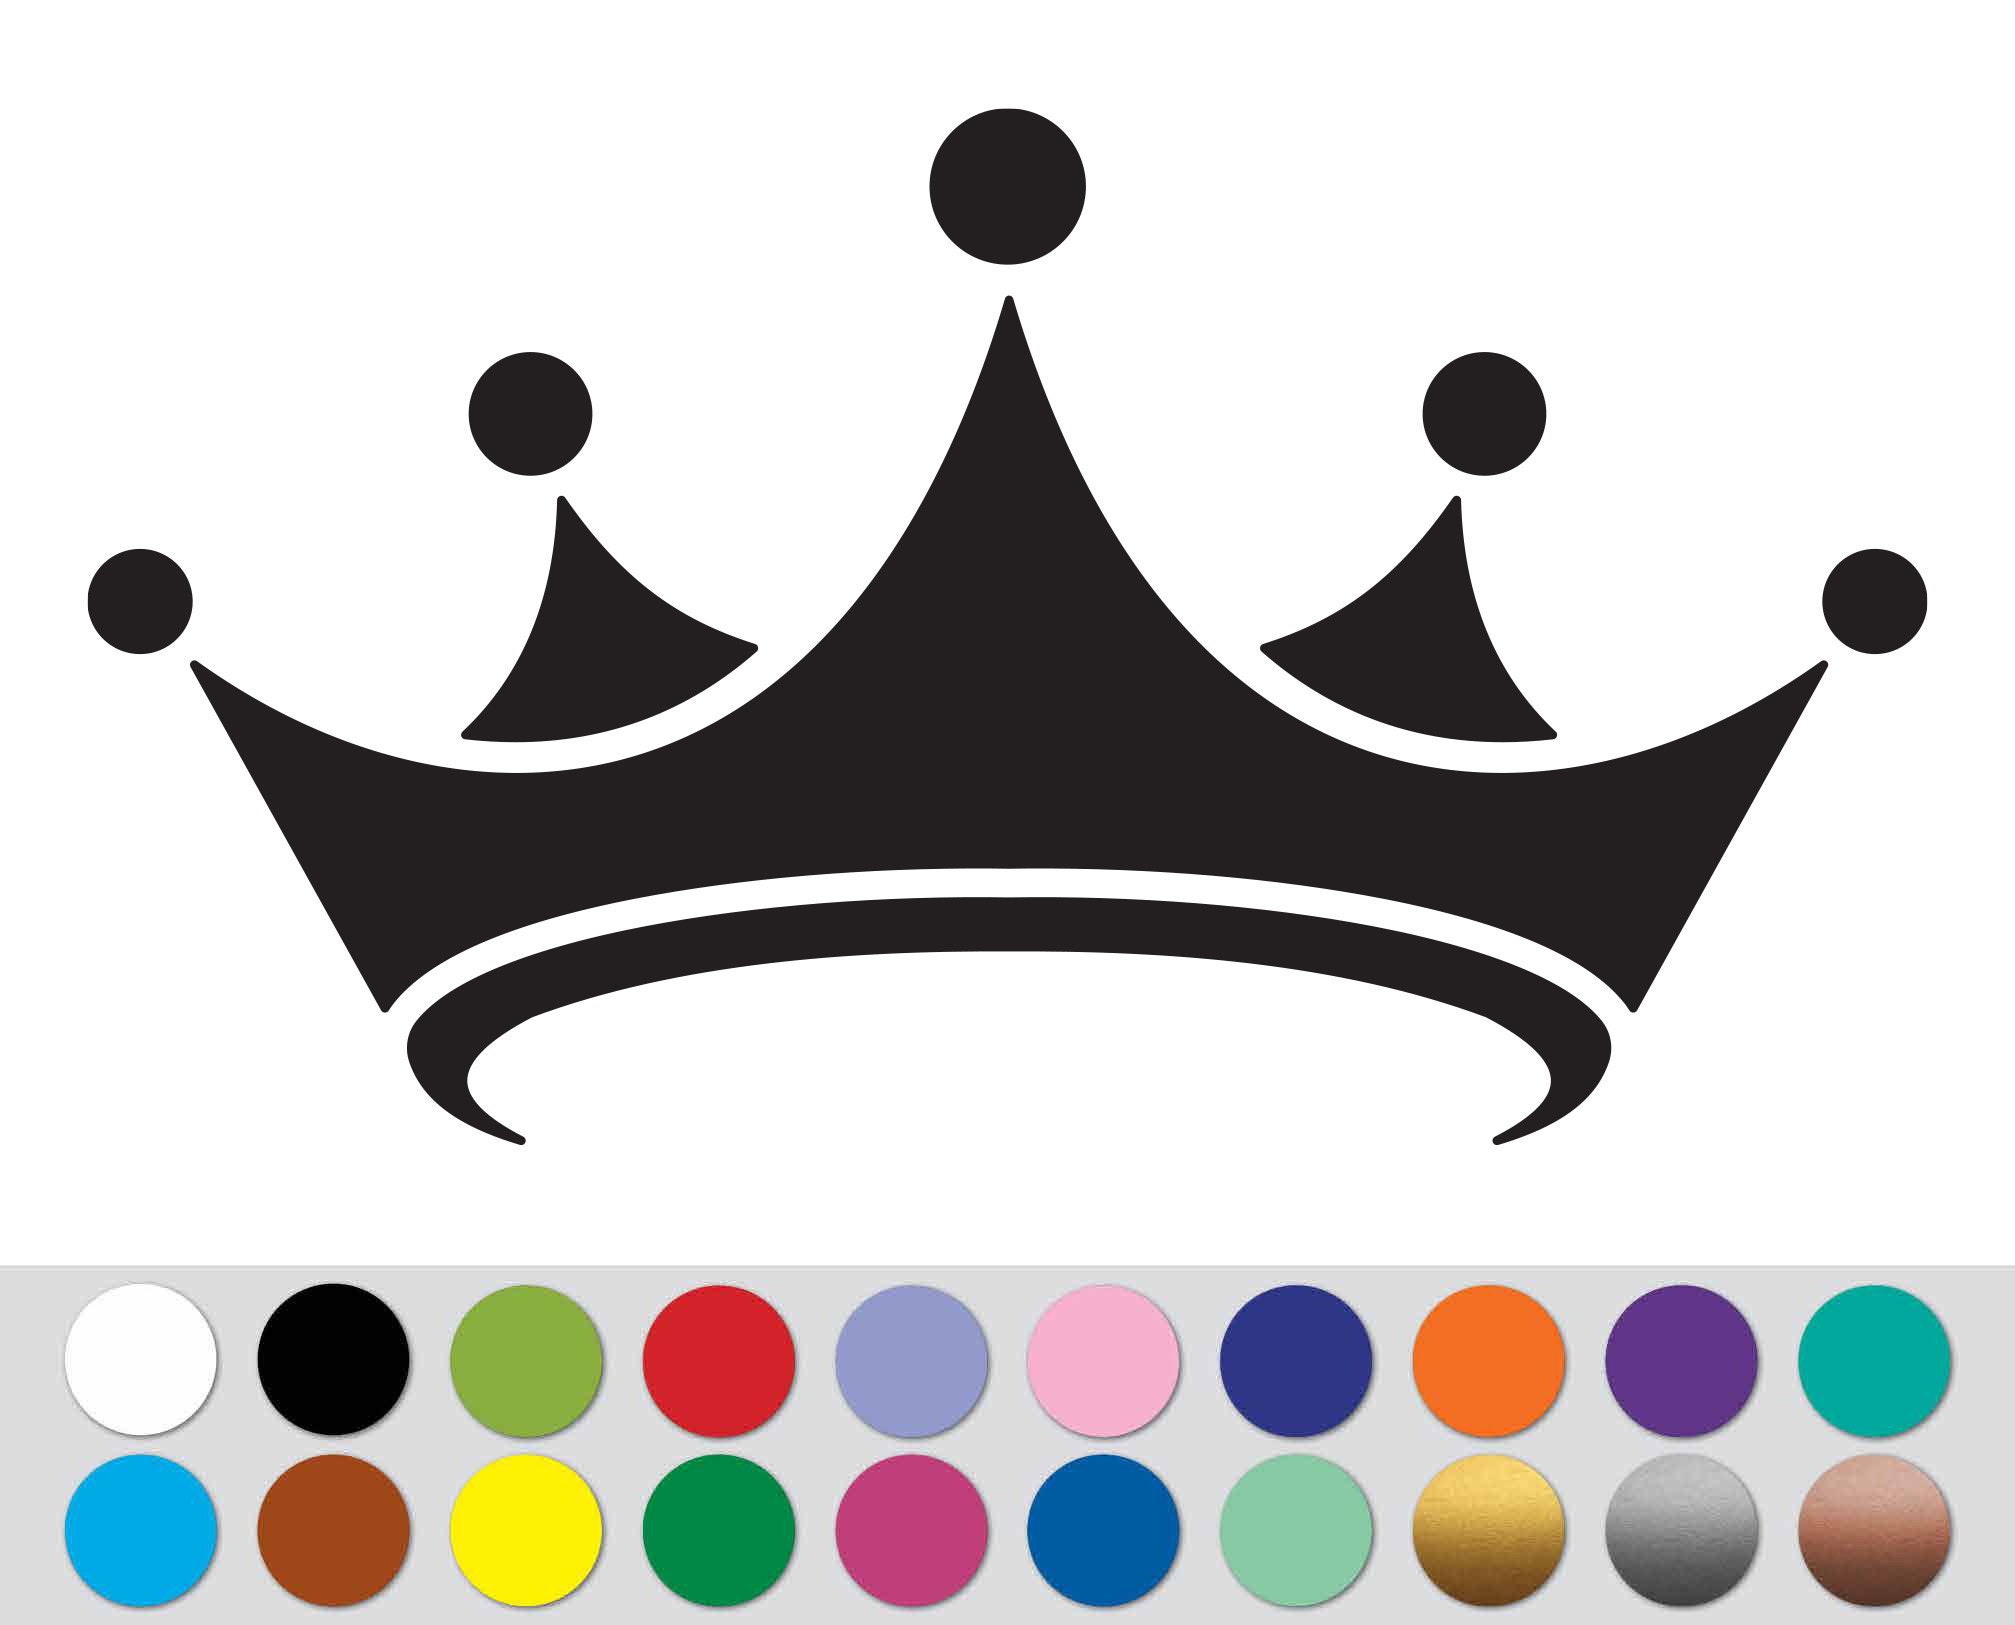 King Crown Decal for Helmets, Cars Windows Decal 